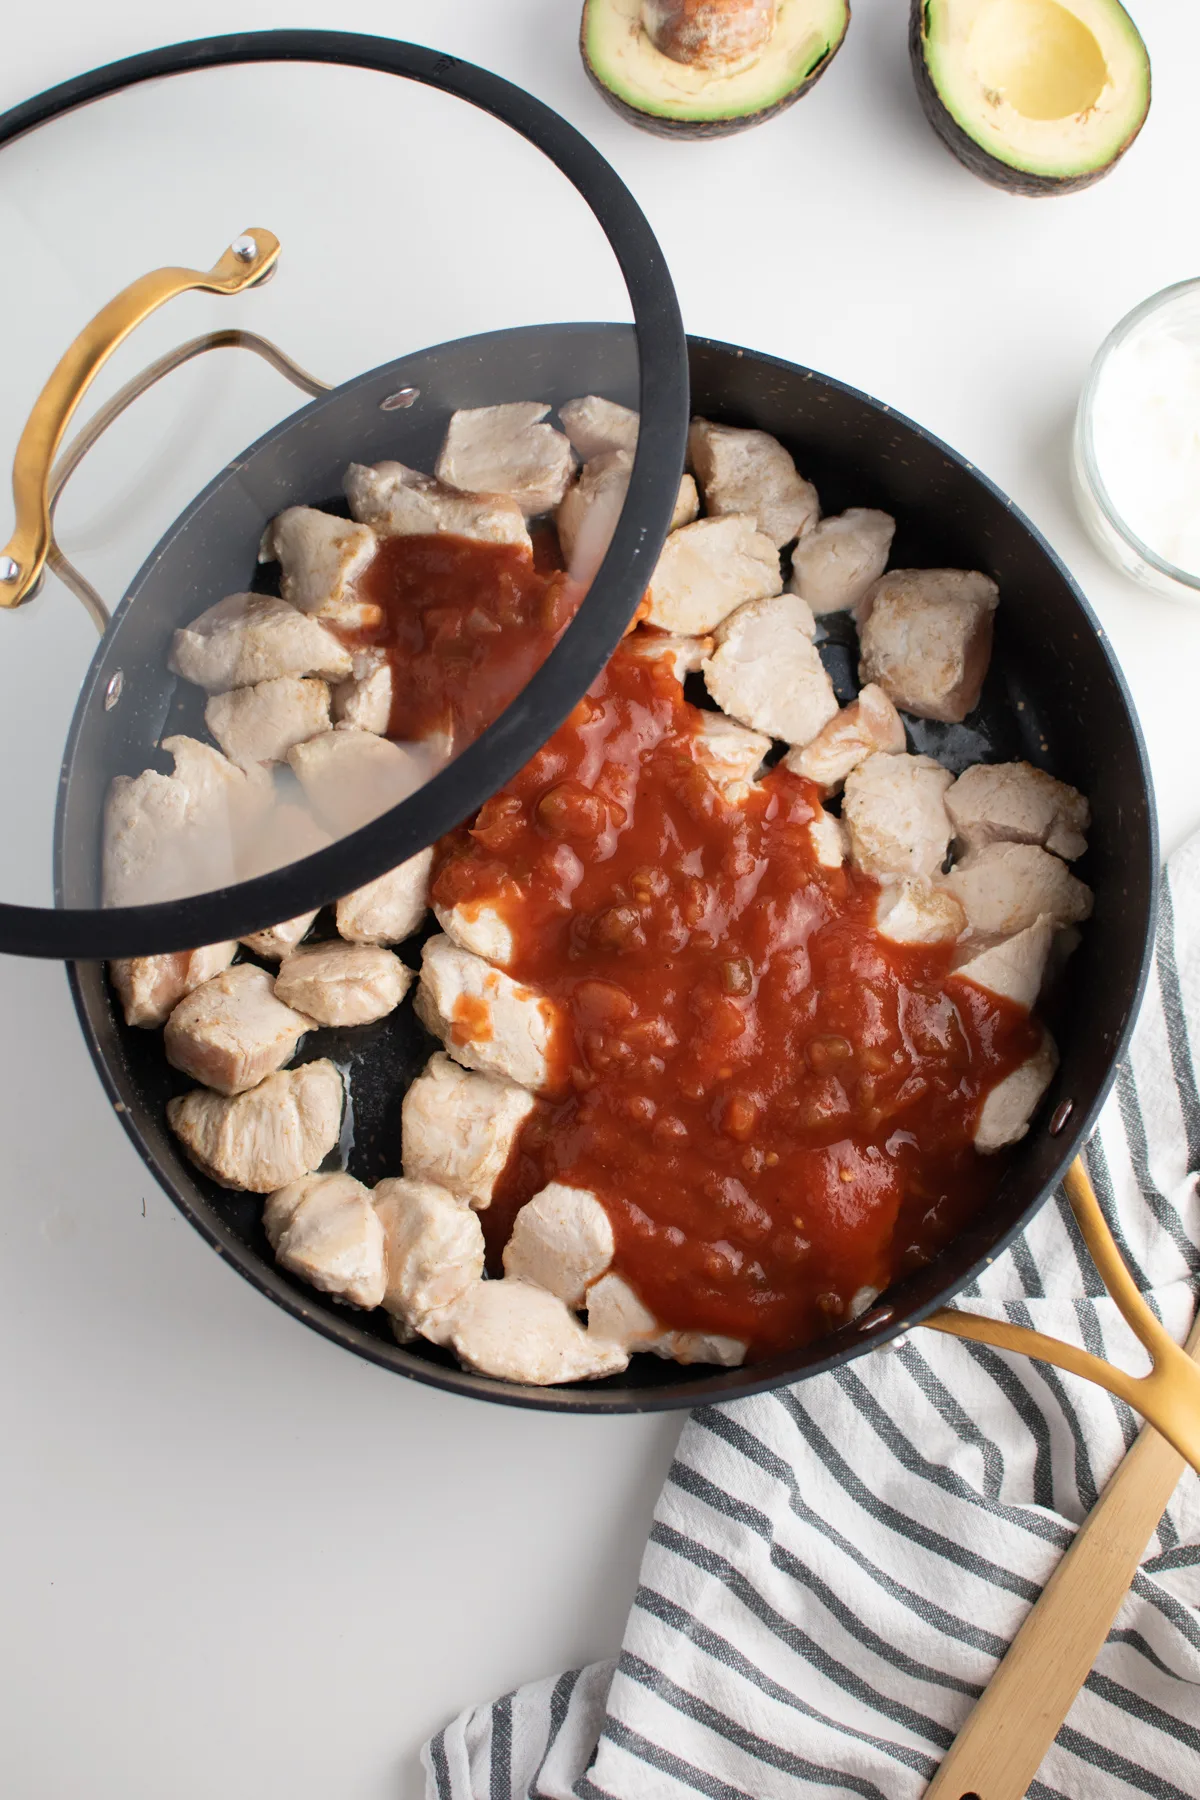 Picante sauce over cooked chicken pieces in large black skillet with lid.